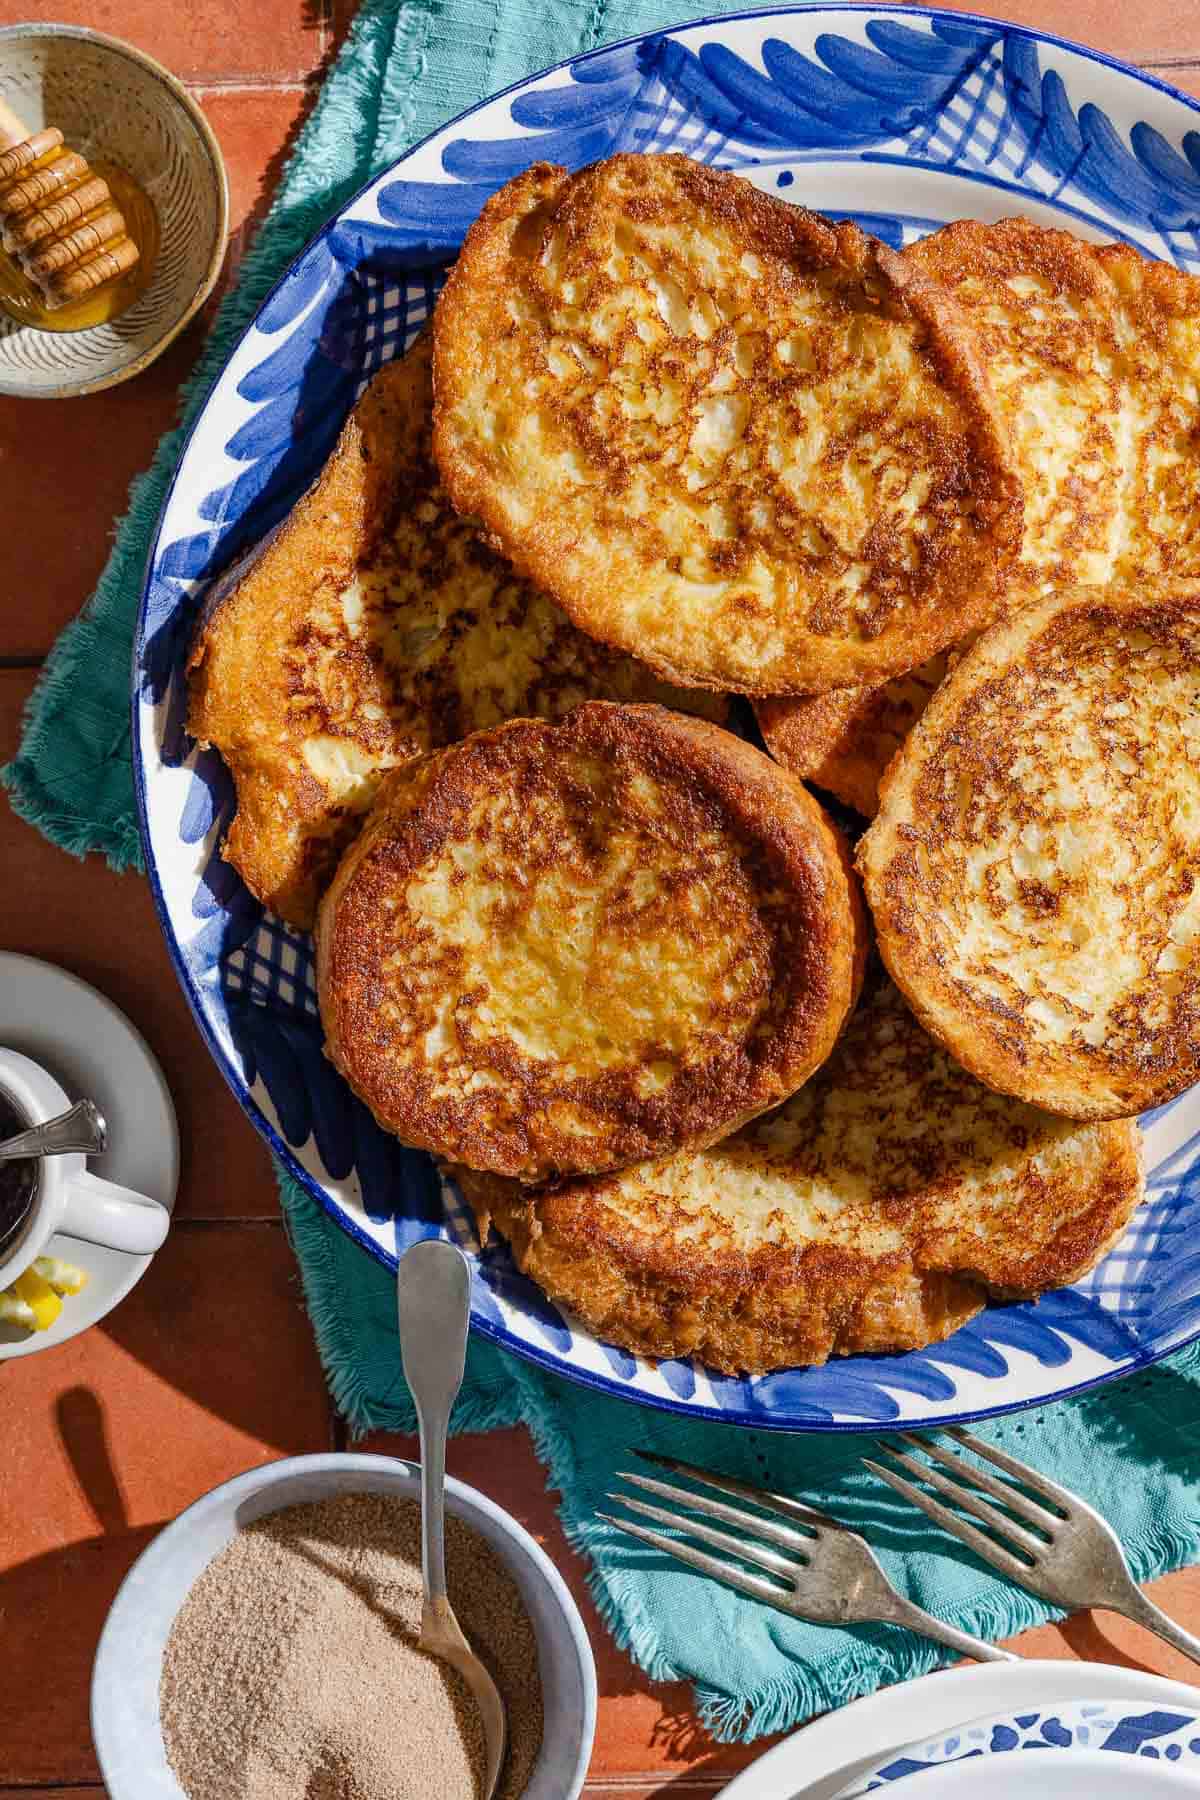 Several torrijas on a serving platter surrounded by bowls of honey and cinnamon sugar, a cup of coffee, a stack of plates and 2 forks.